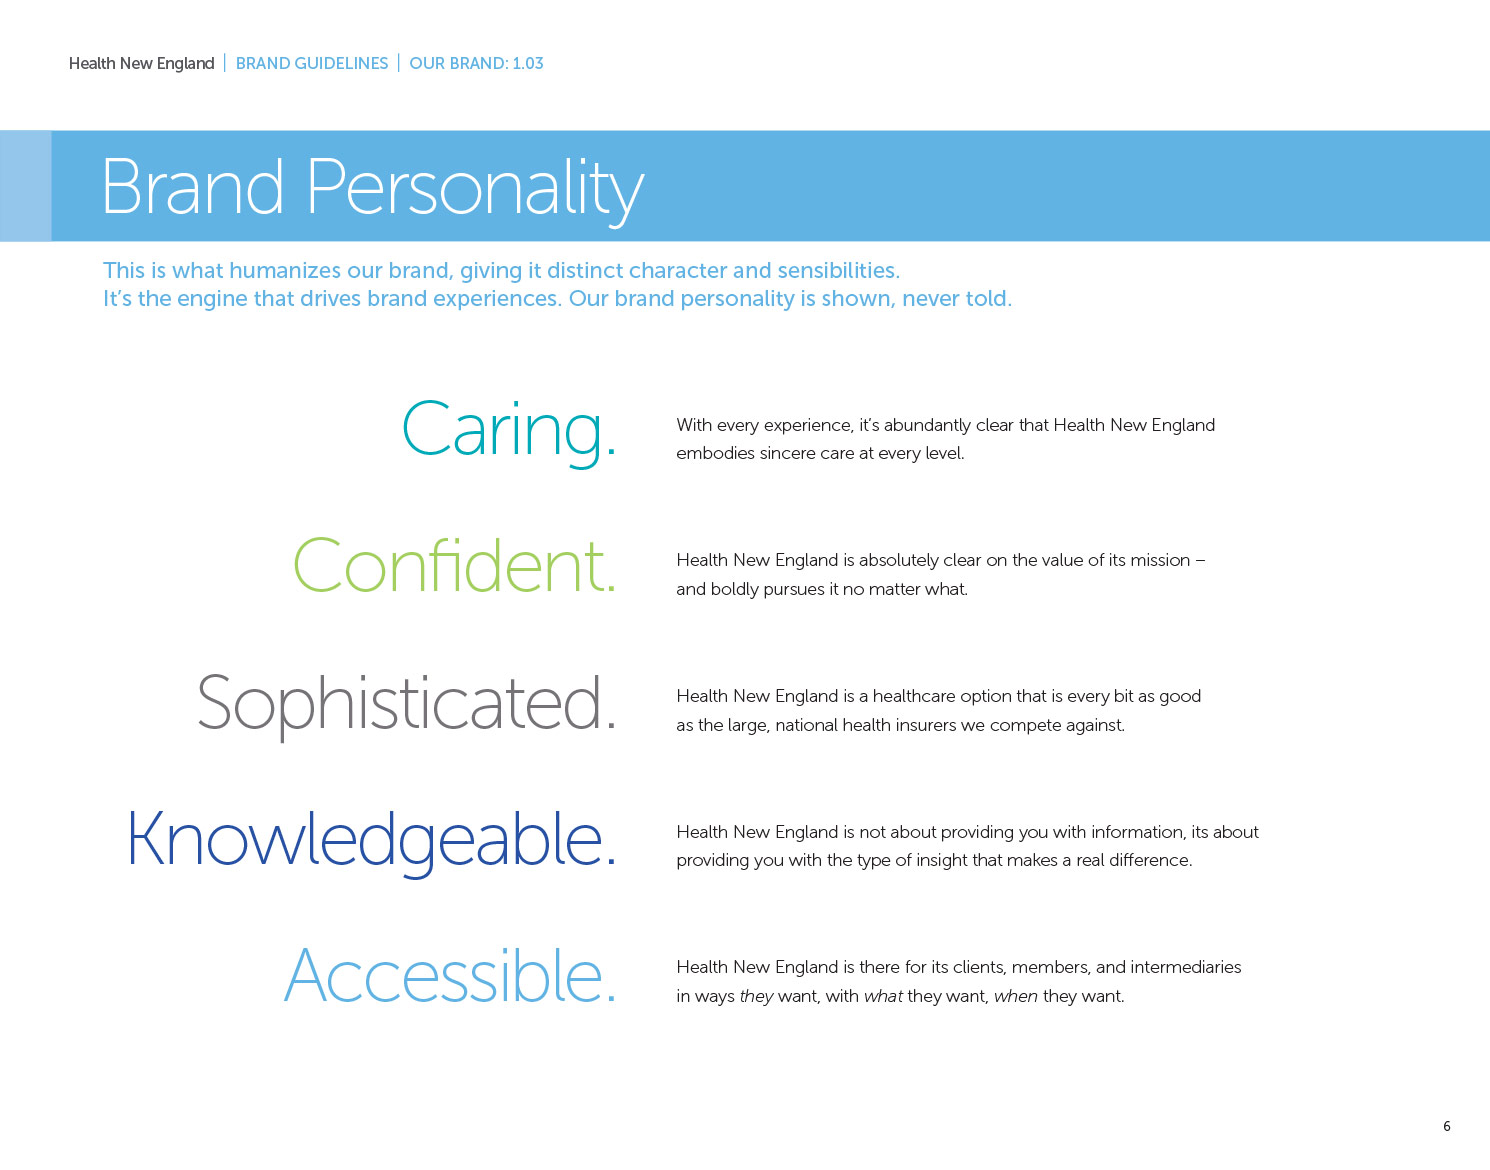 Health New England brand guide brand personality